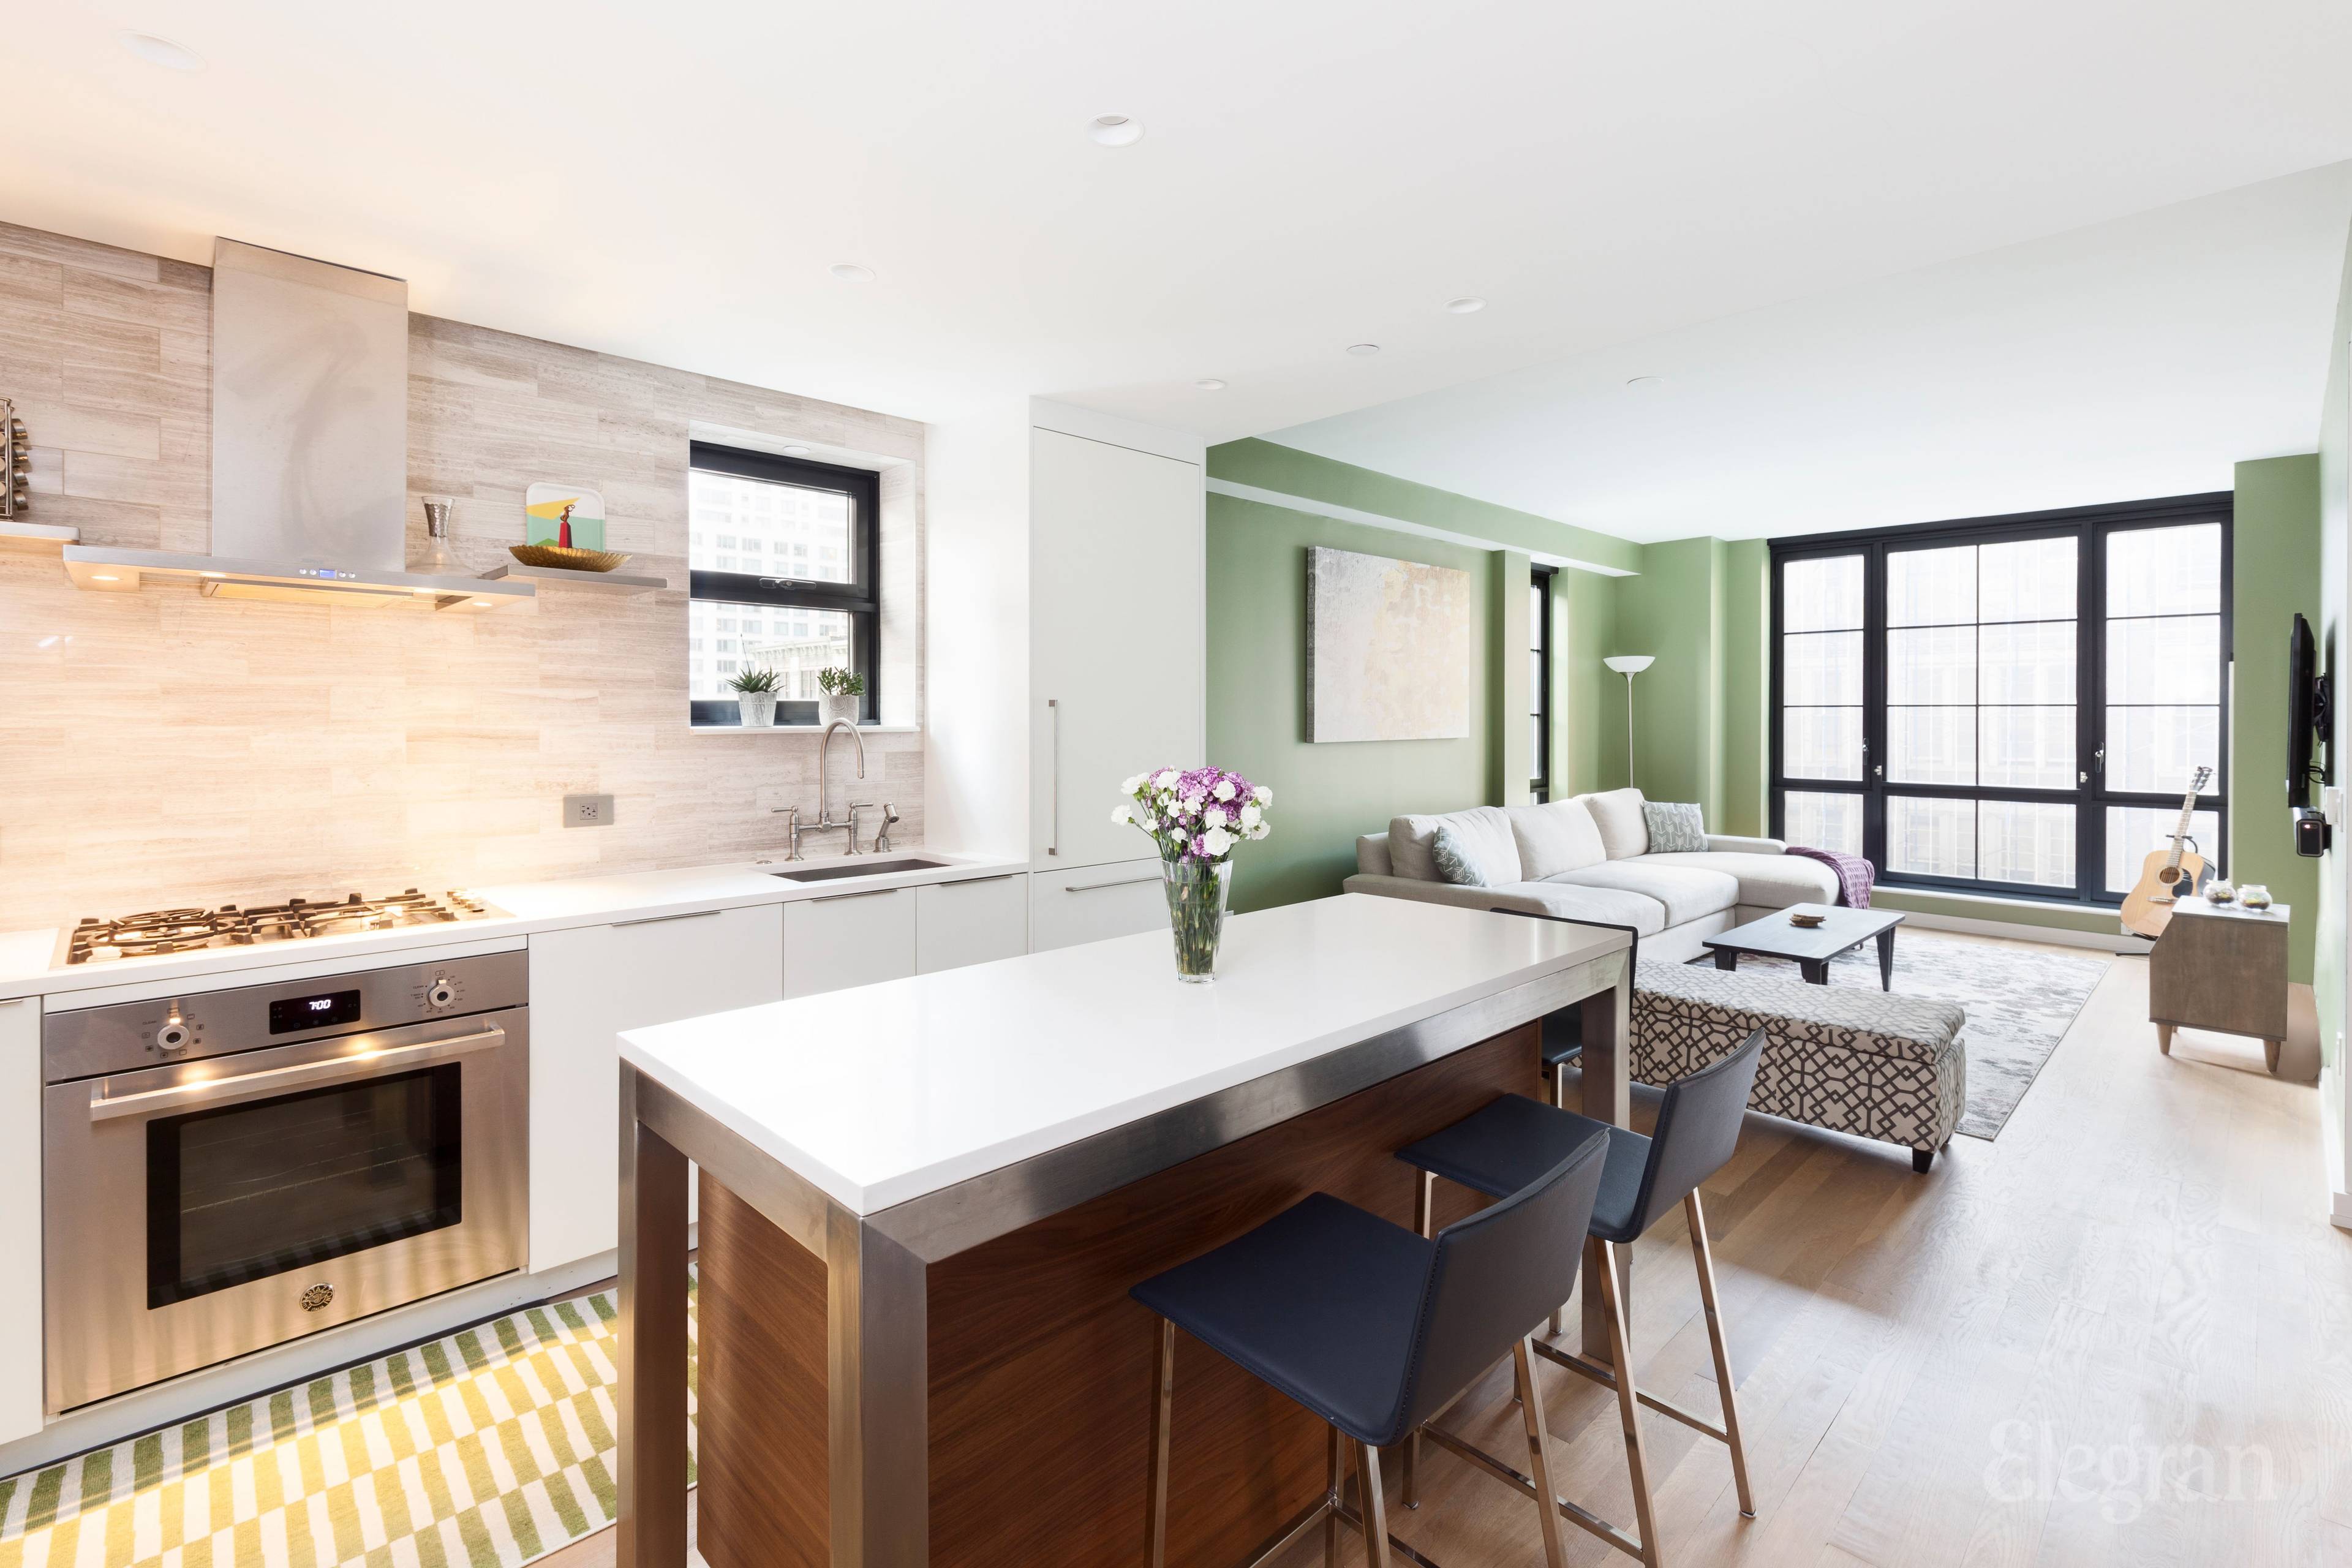 AVAILABLE IMMEDIATELY. 234 East 23rd Street elevates new construction luxury only two blocks from the 4 6 trains and three blocks from Madison Square Park.